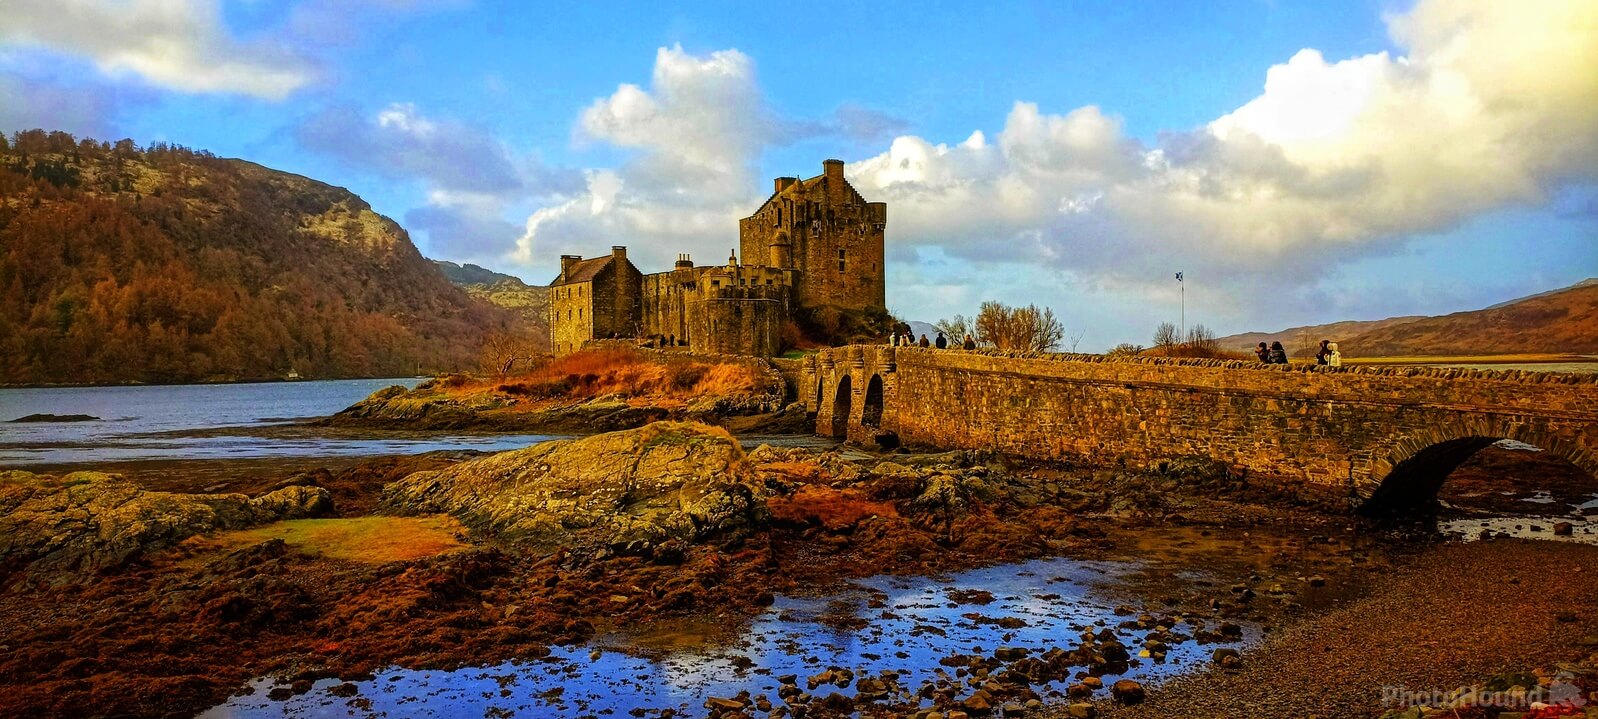 Image of Eilean Donan Castle by David Lally